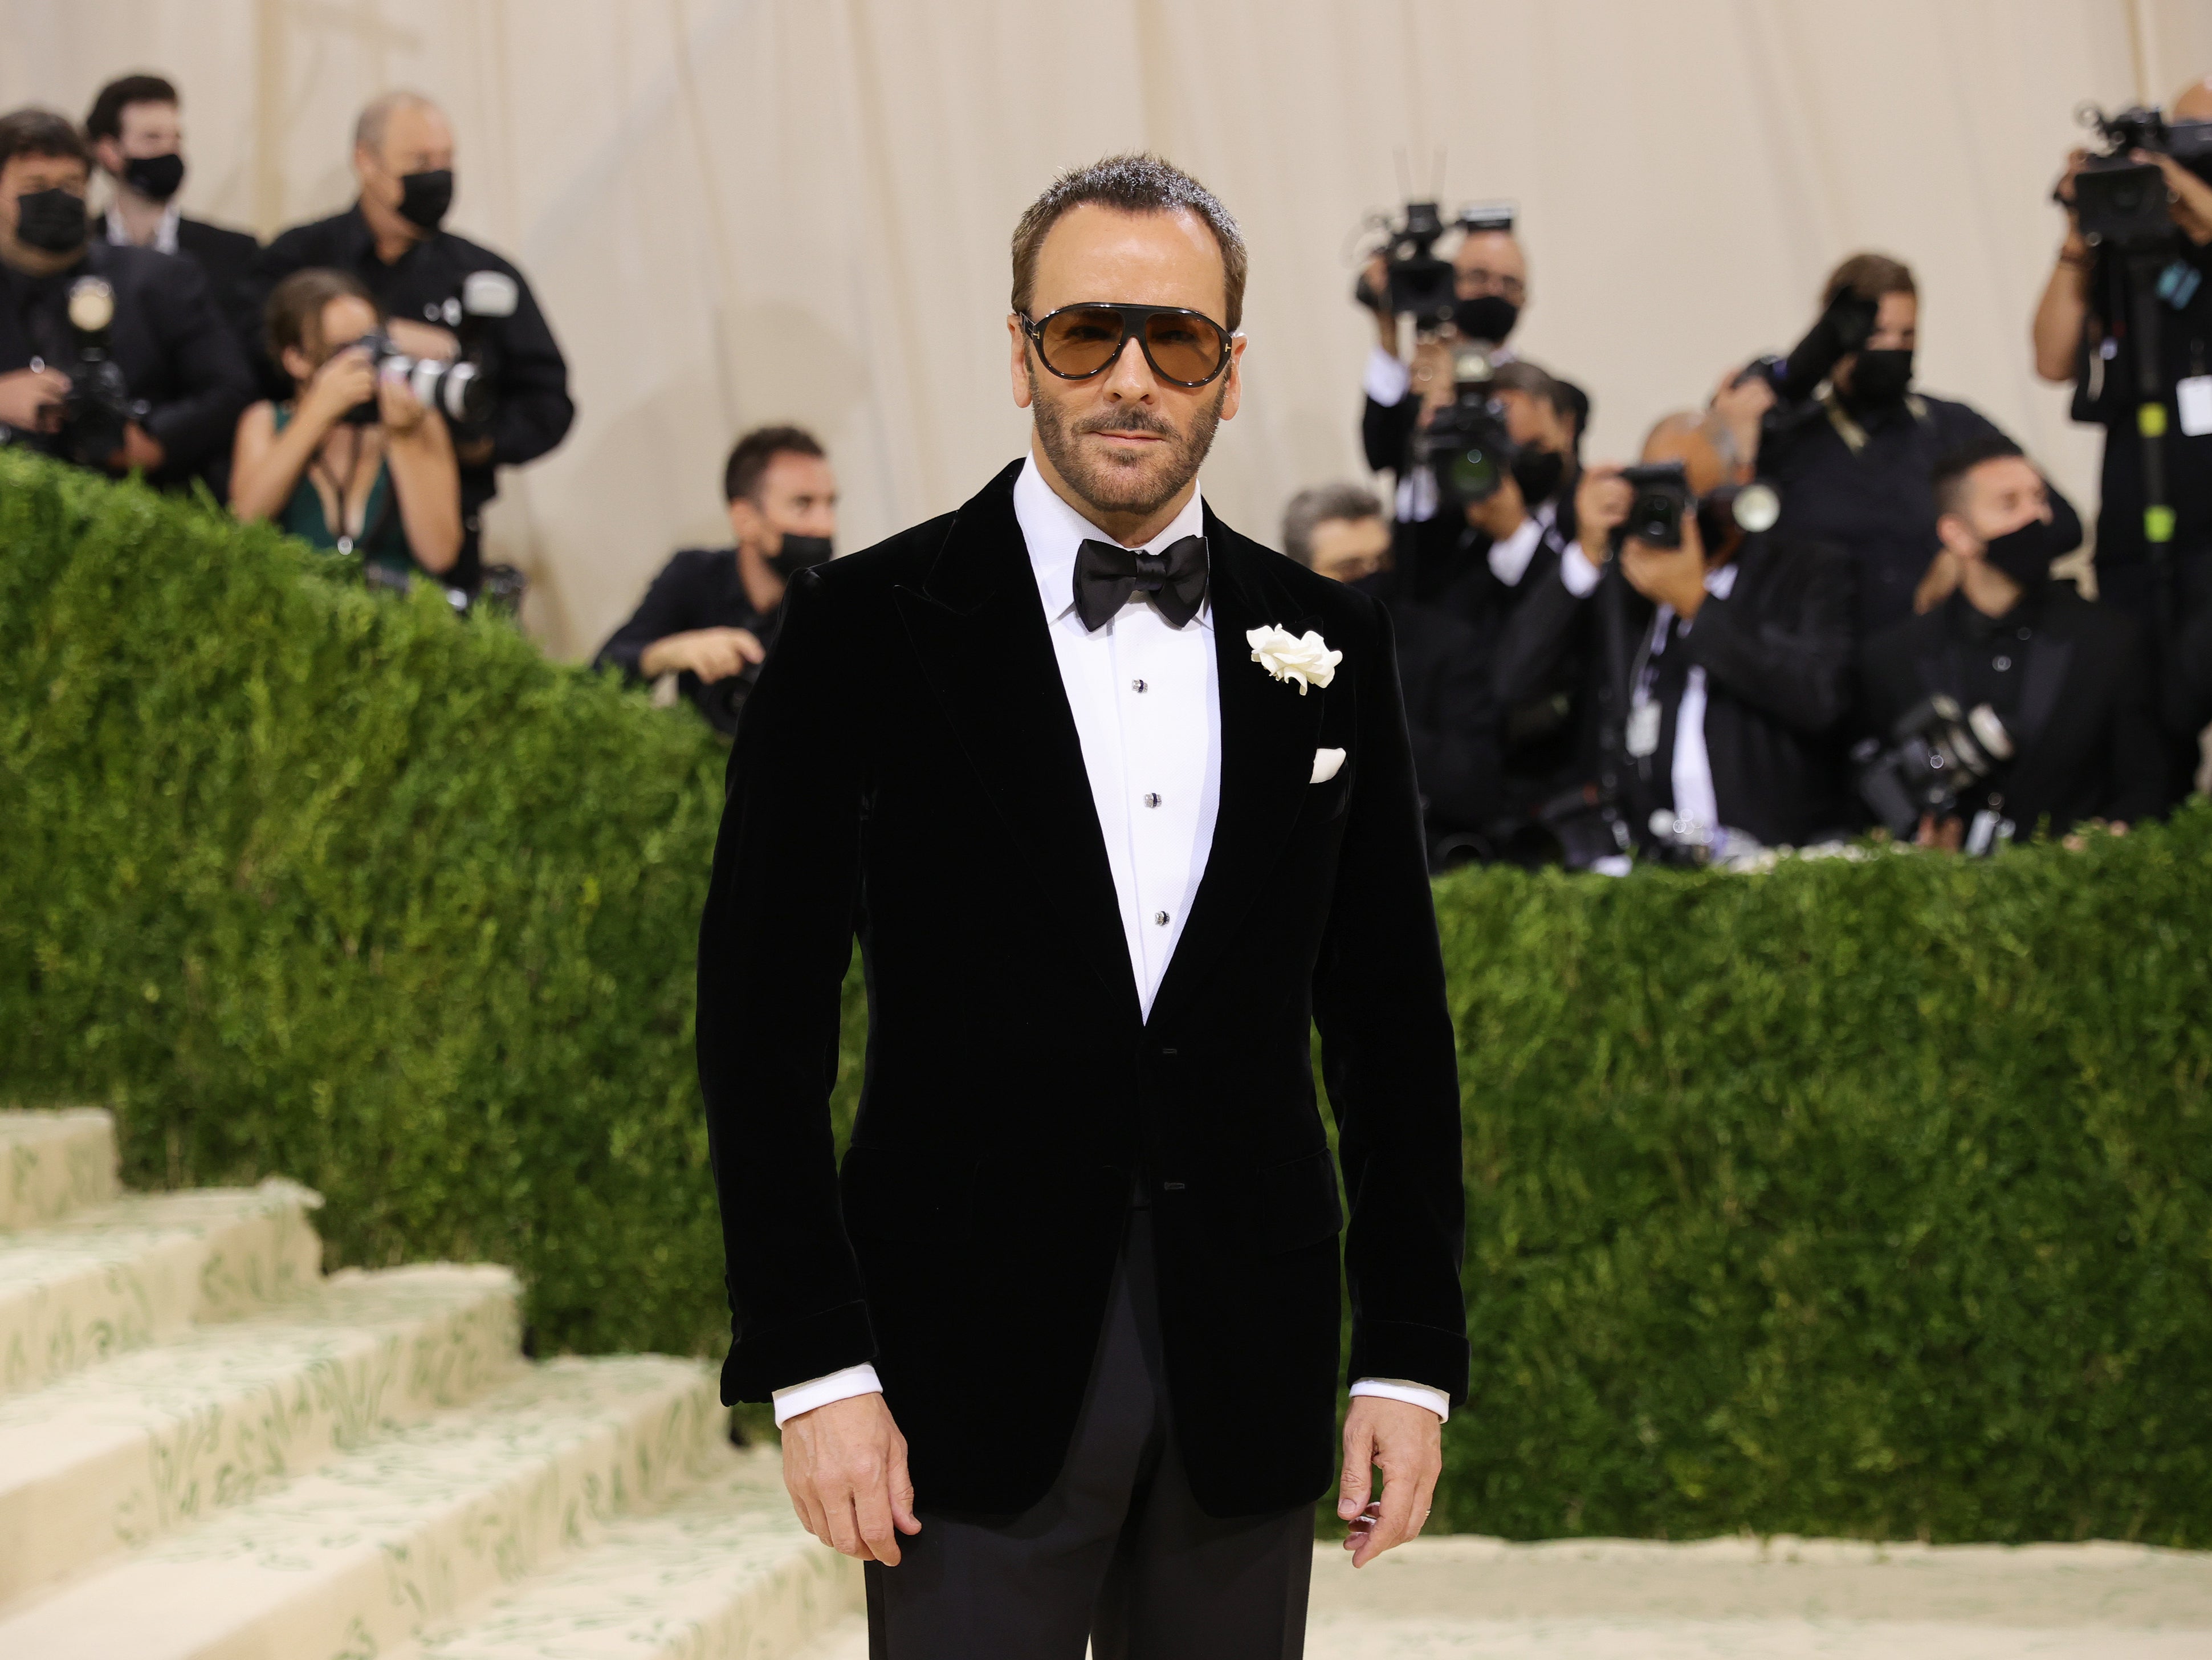 Cancel culture makes it very ‘tough to be creative’, says Tom Ford ...